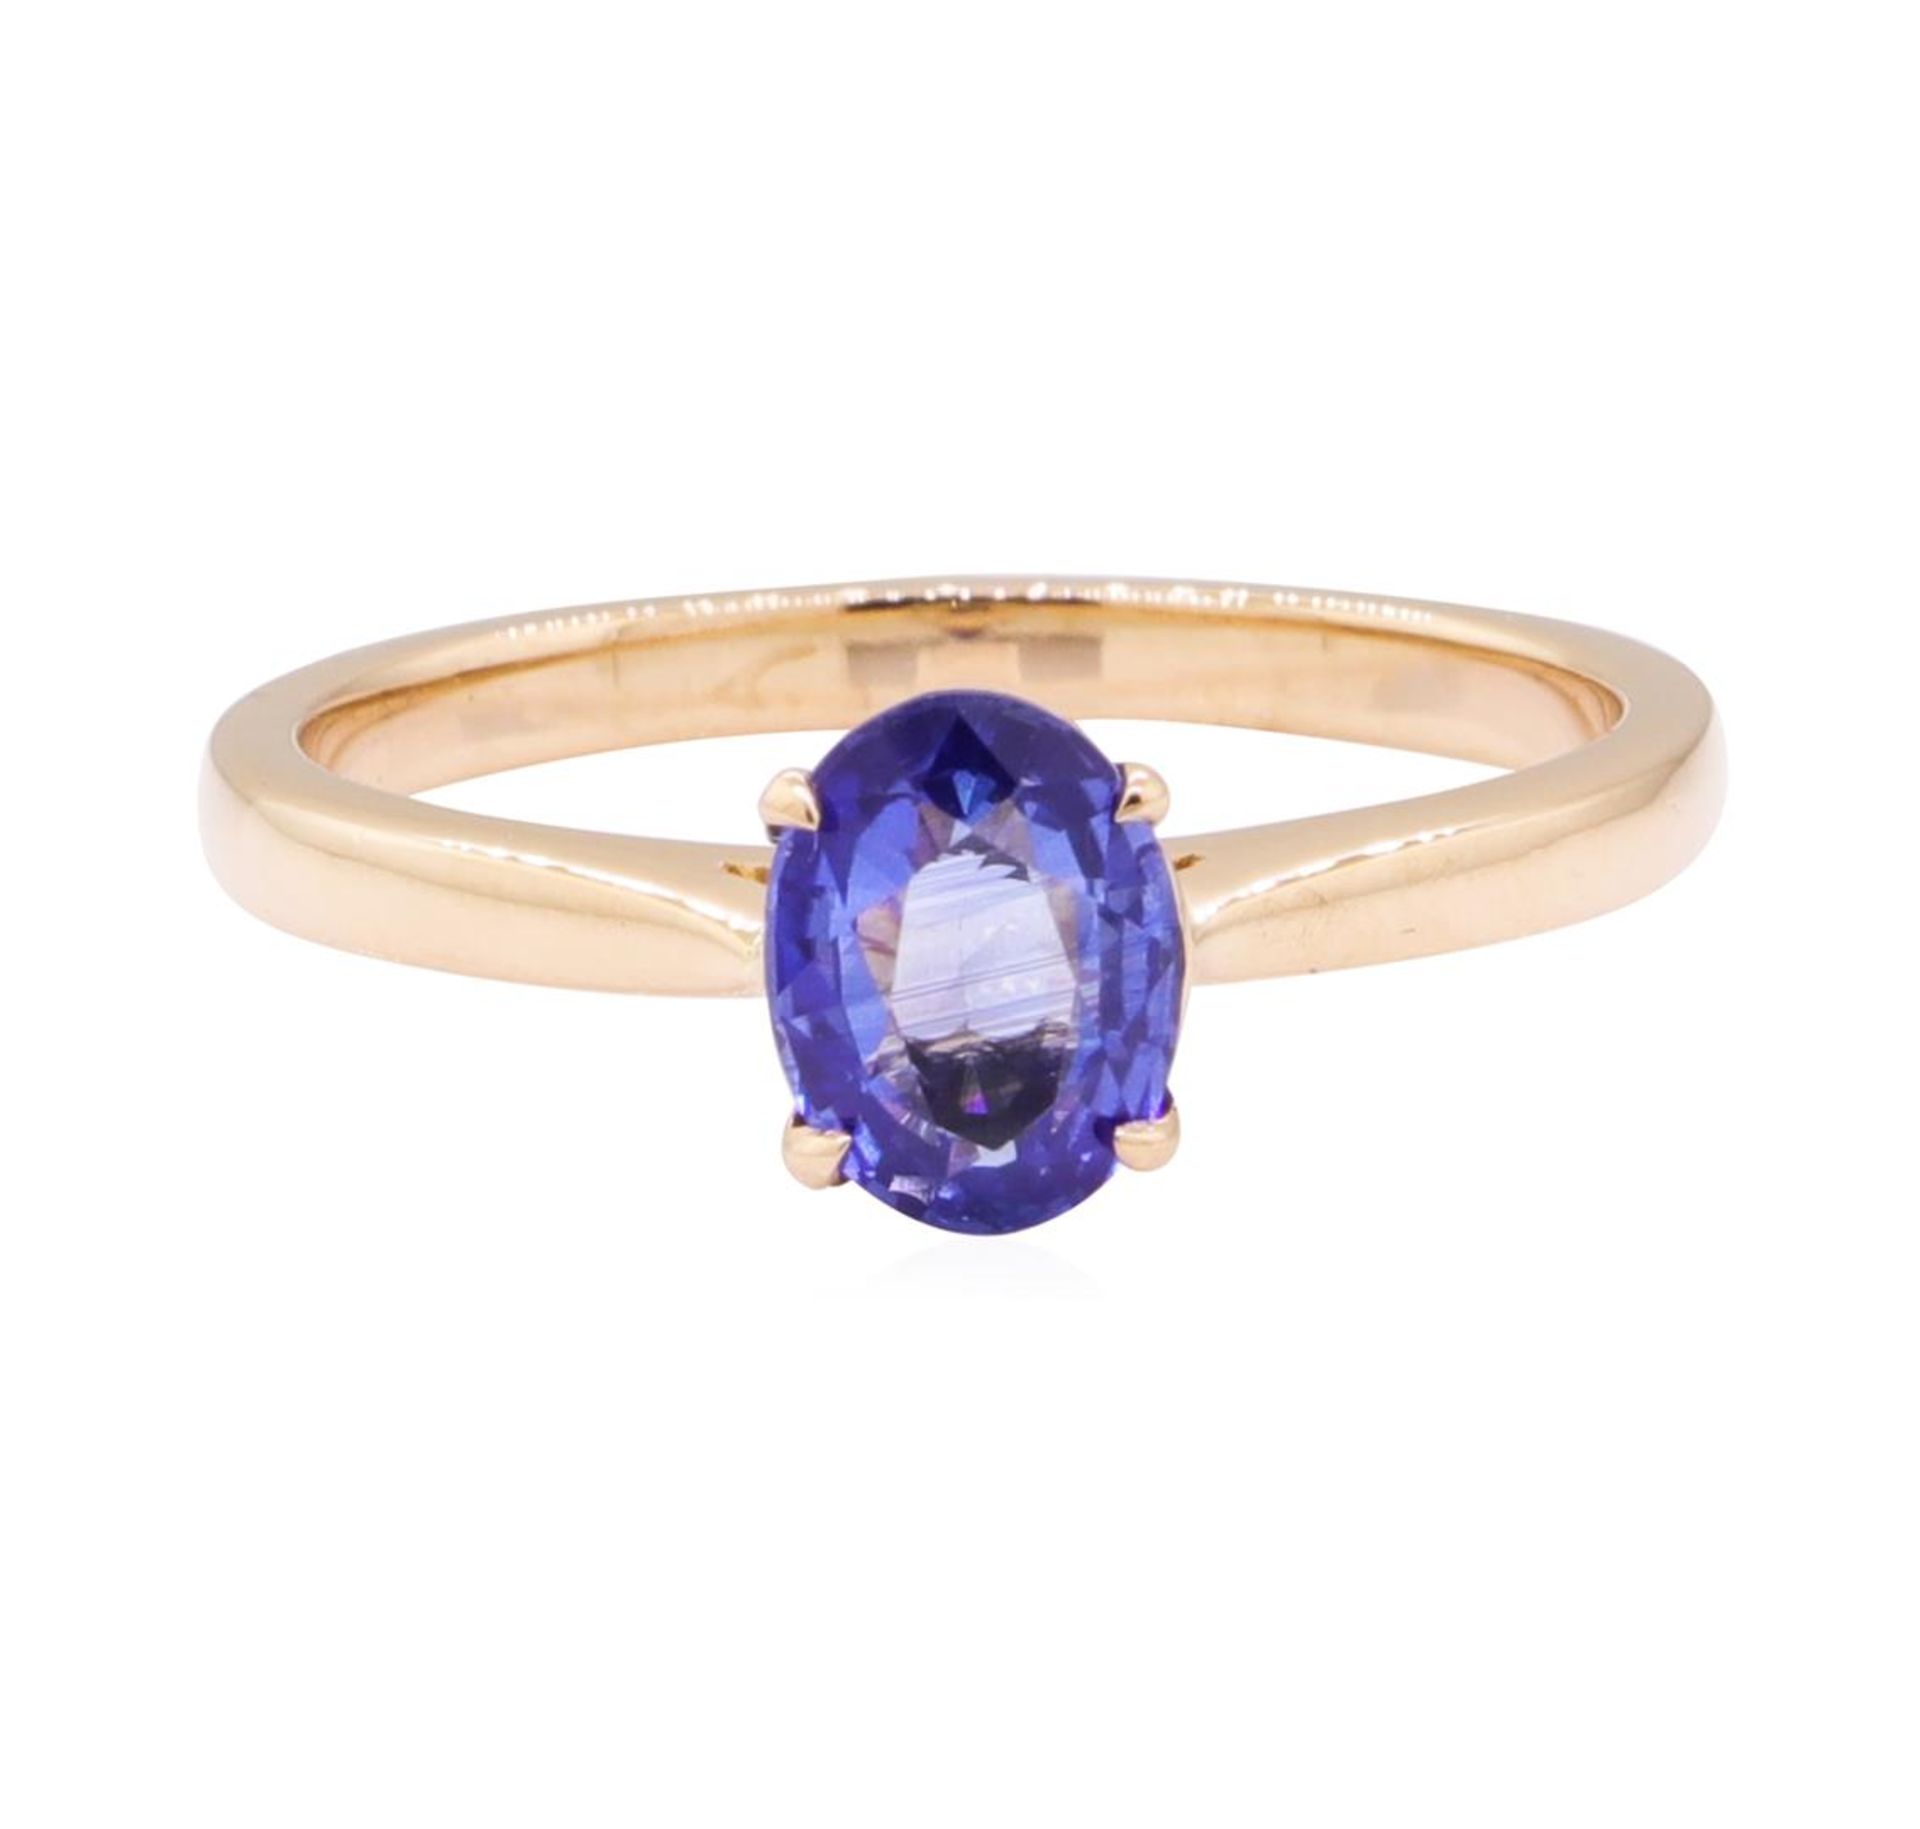 0.98 ctw Blue Sapphire Ring - 18KT Rose Gold - Image 2 of 4